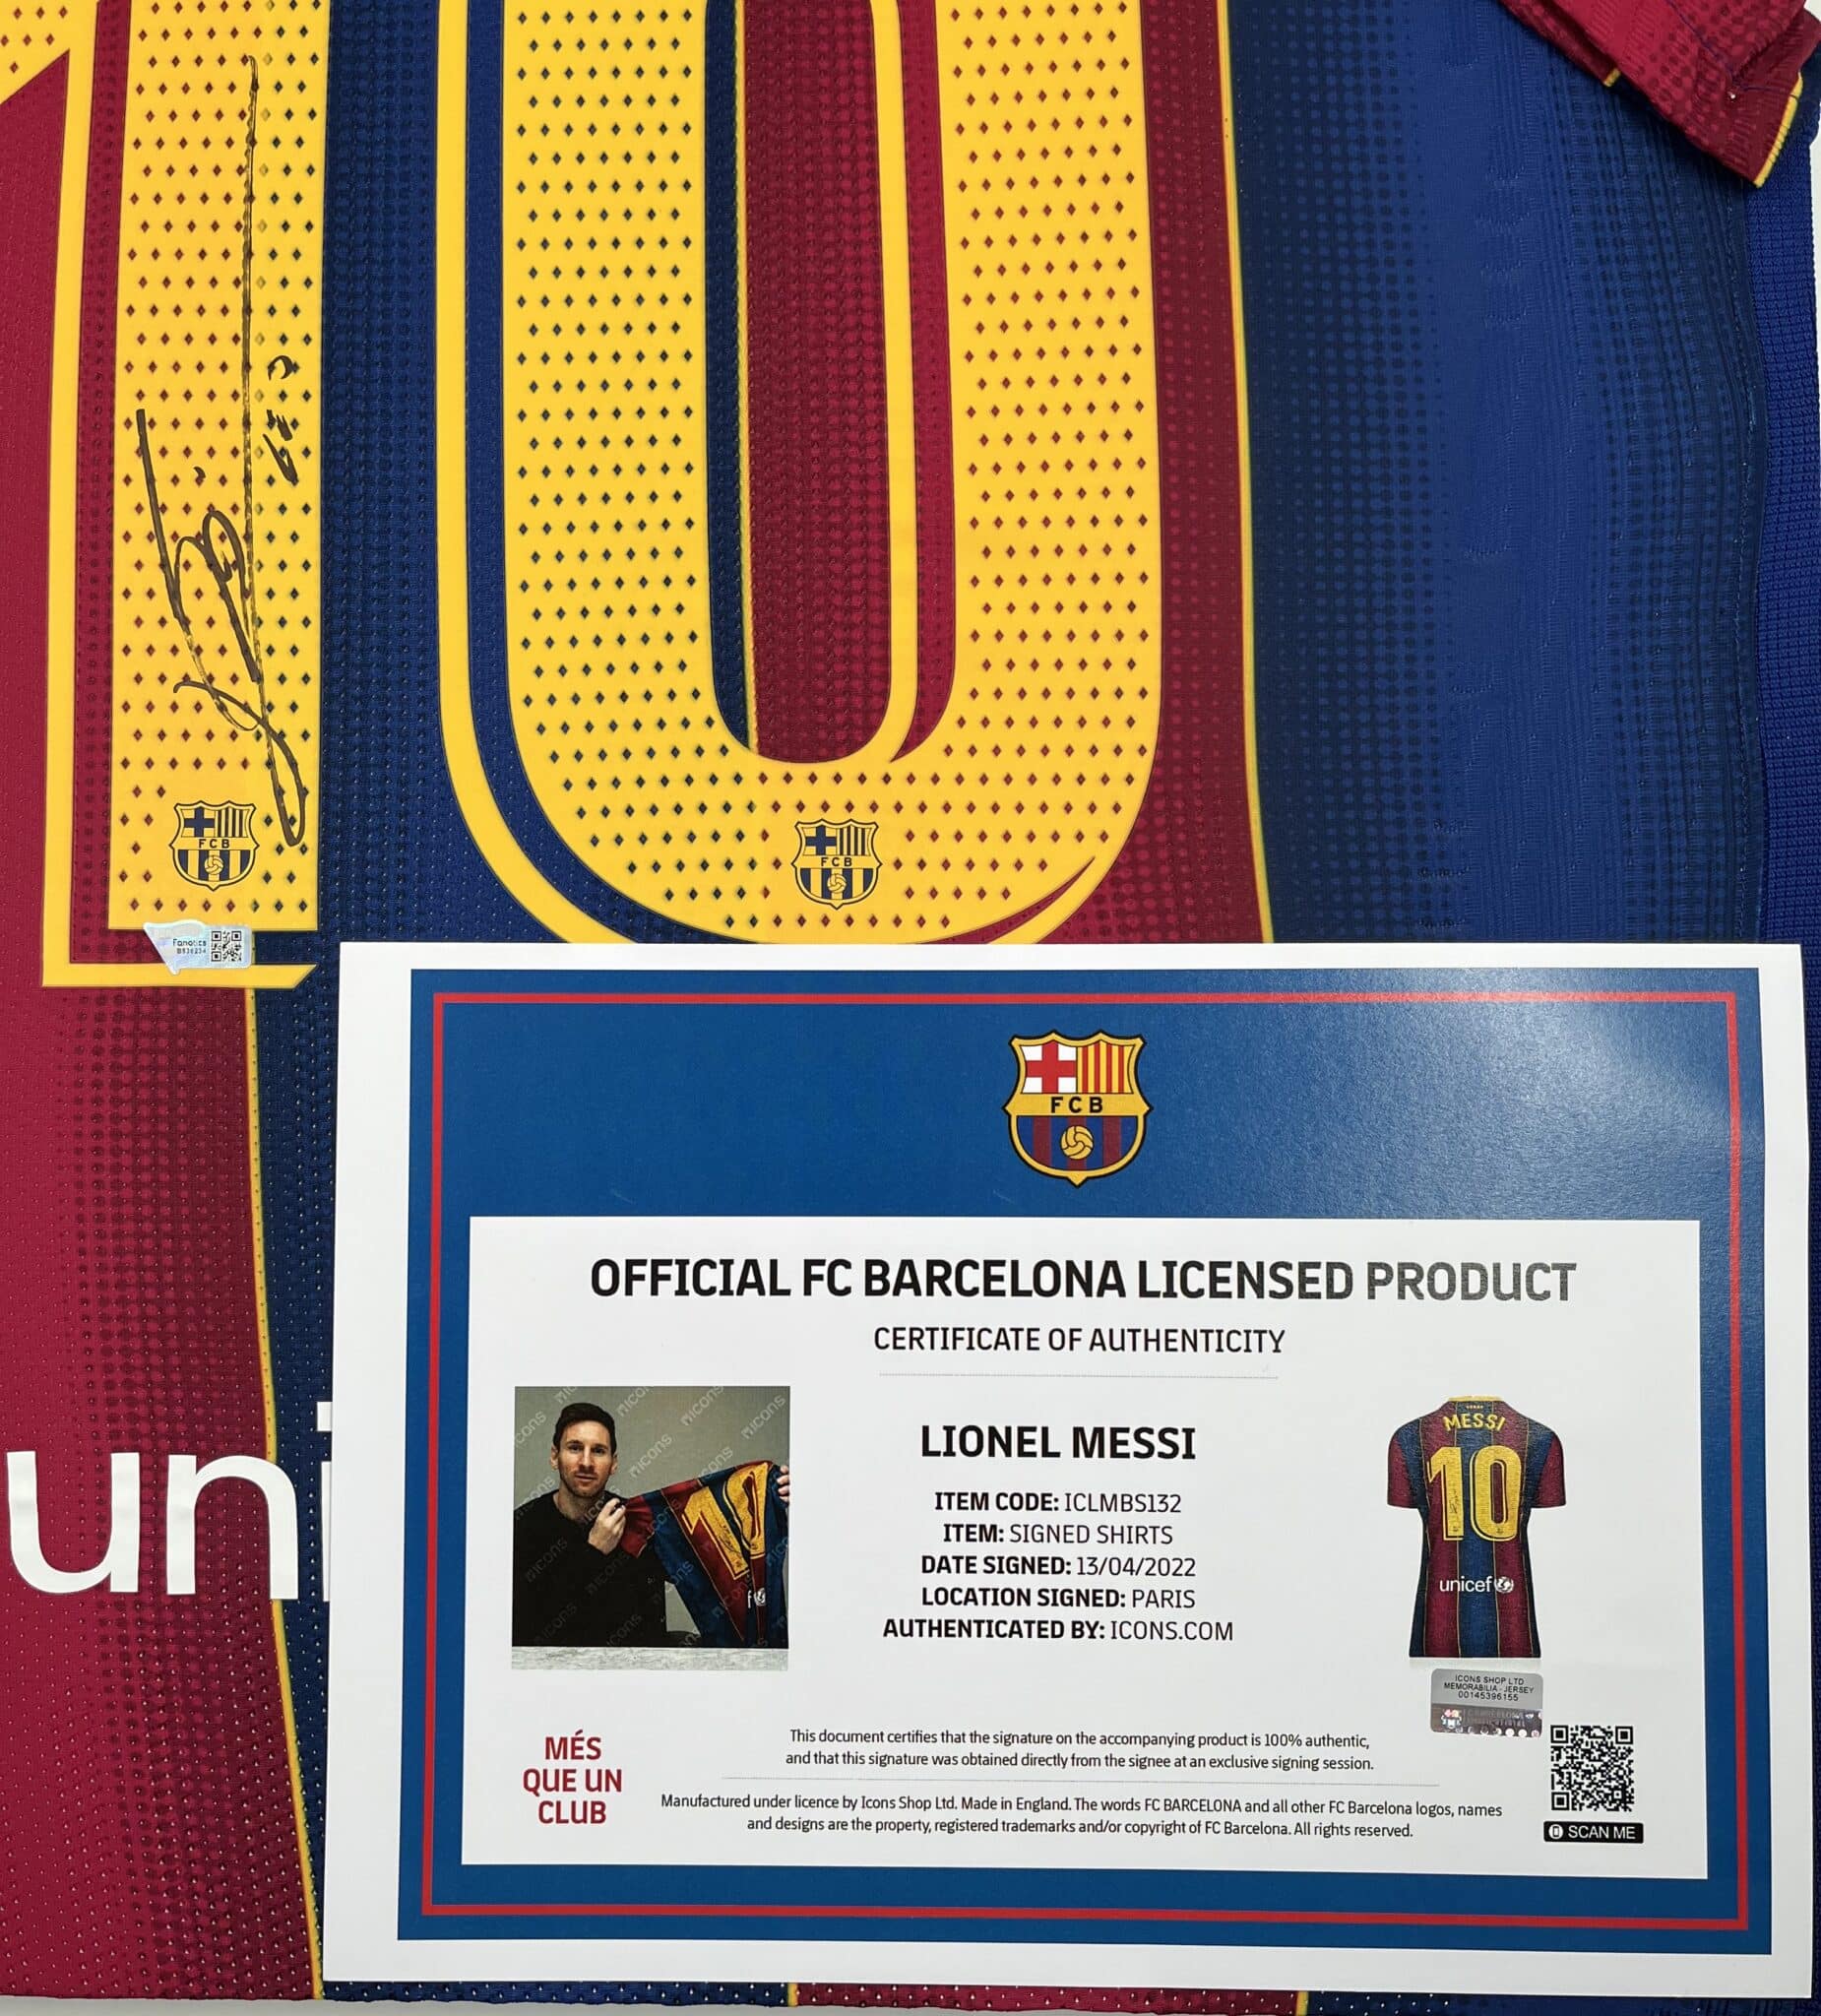 Lionel Messi Authentic Nike Vaporknit Signed Jersey with Black Signature